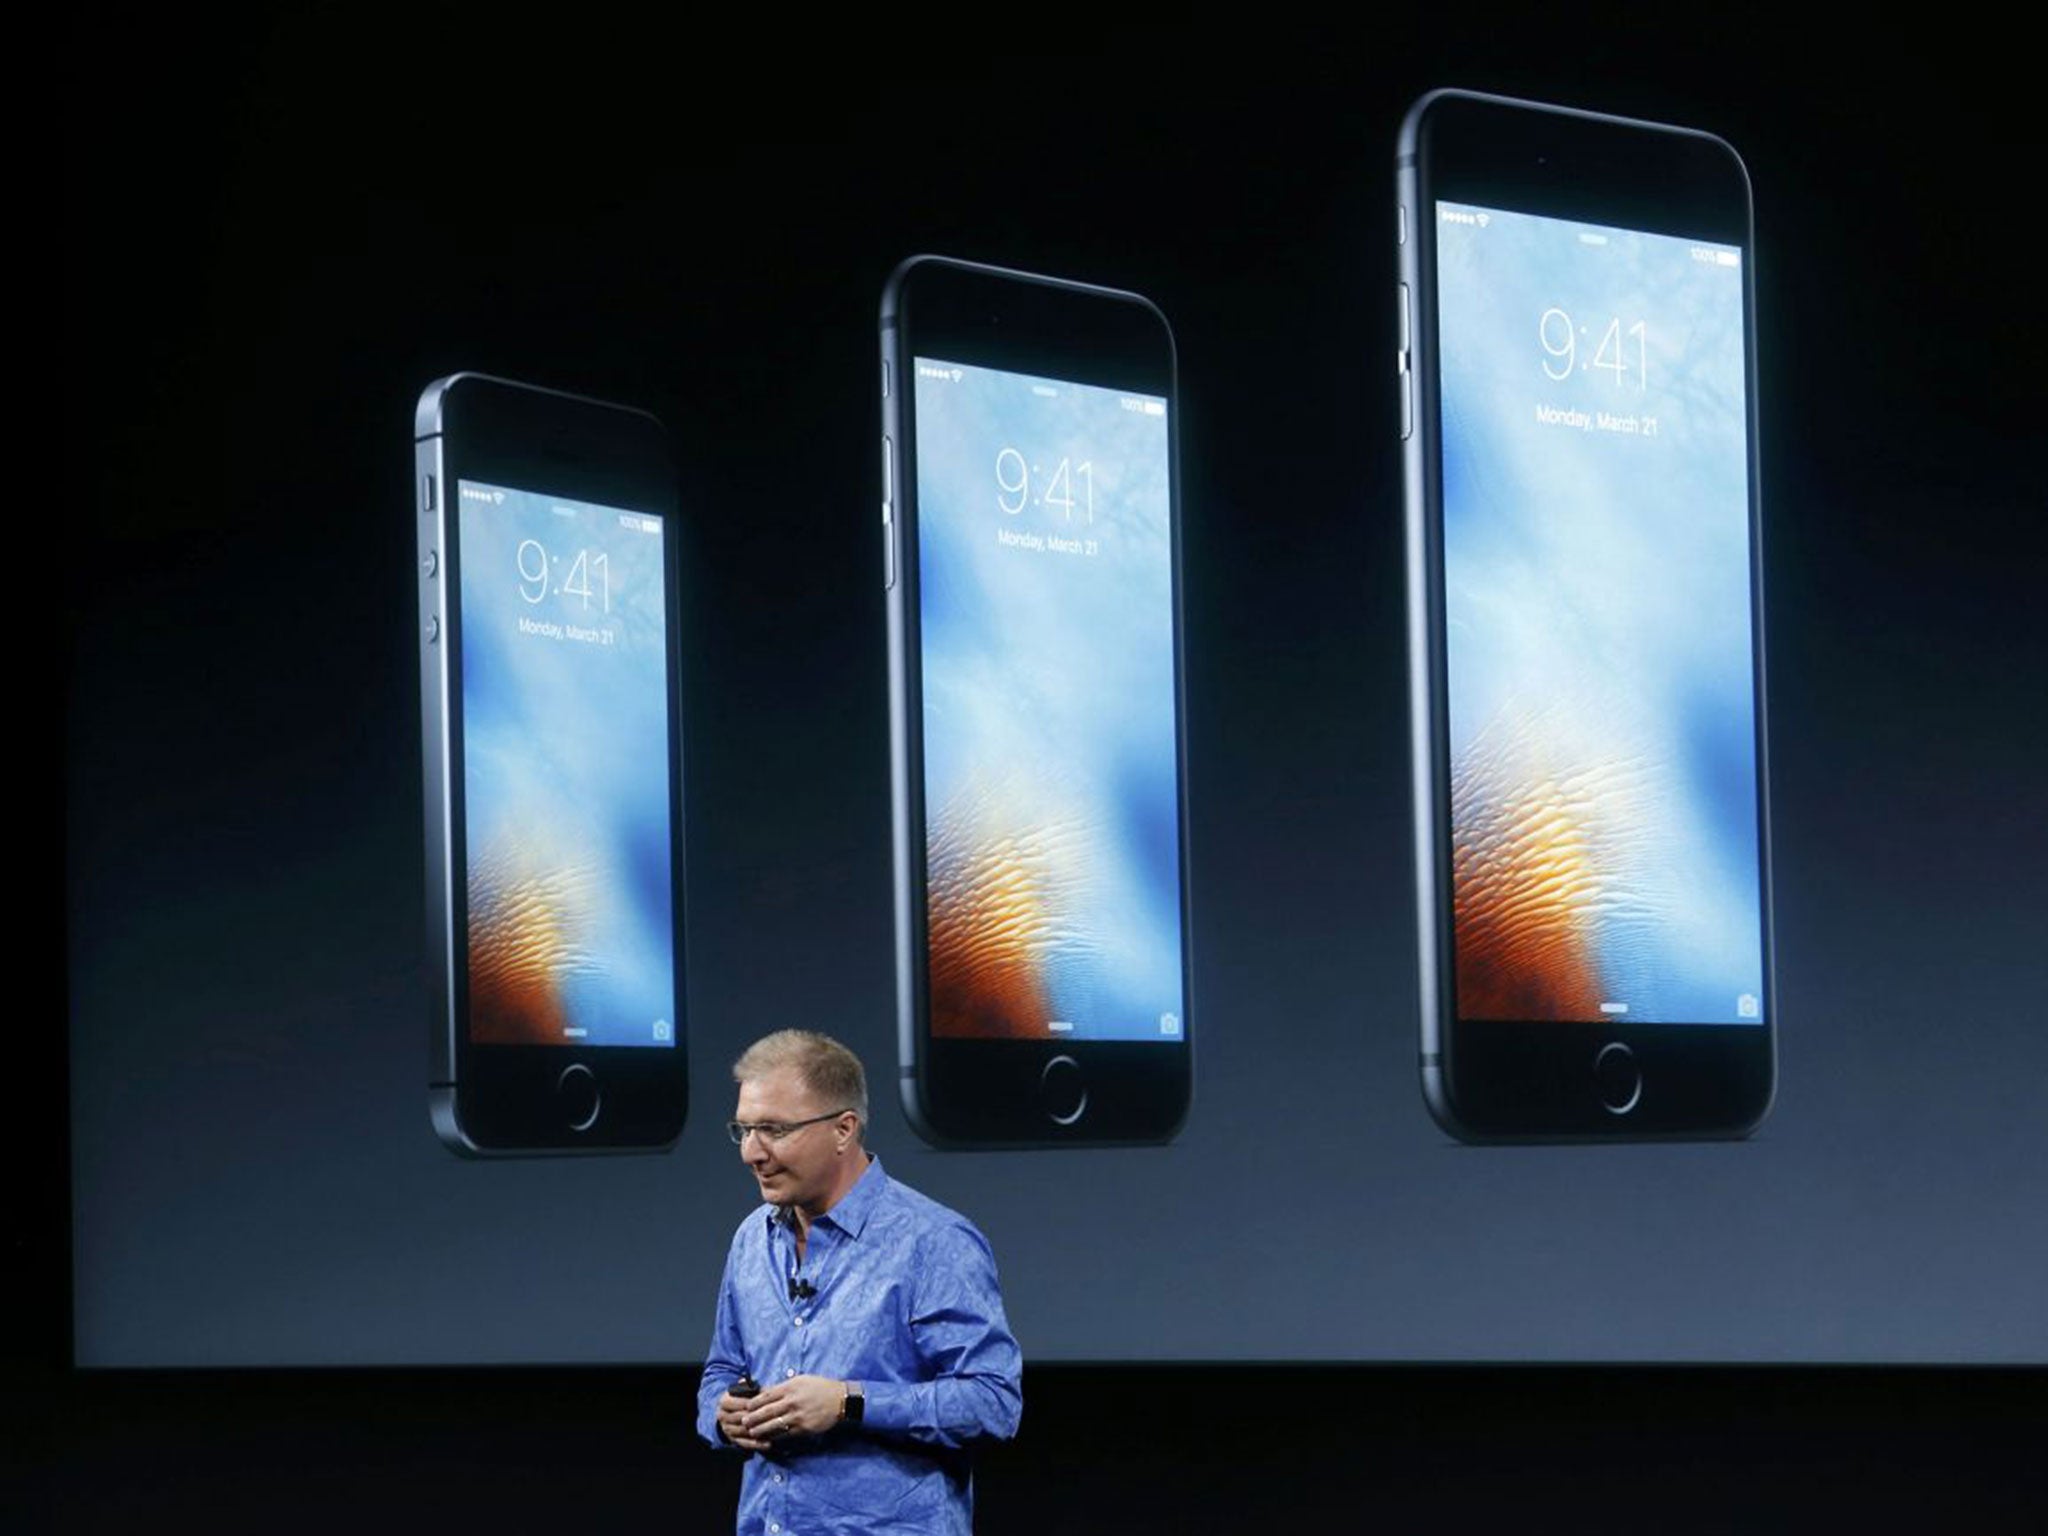 Apple Vice President Greg Joswiak introduces the iPhone SE at the Apple headquarters in Cupertino, California